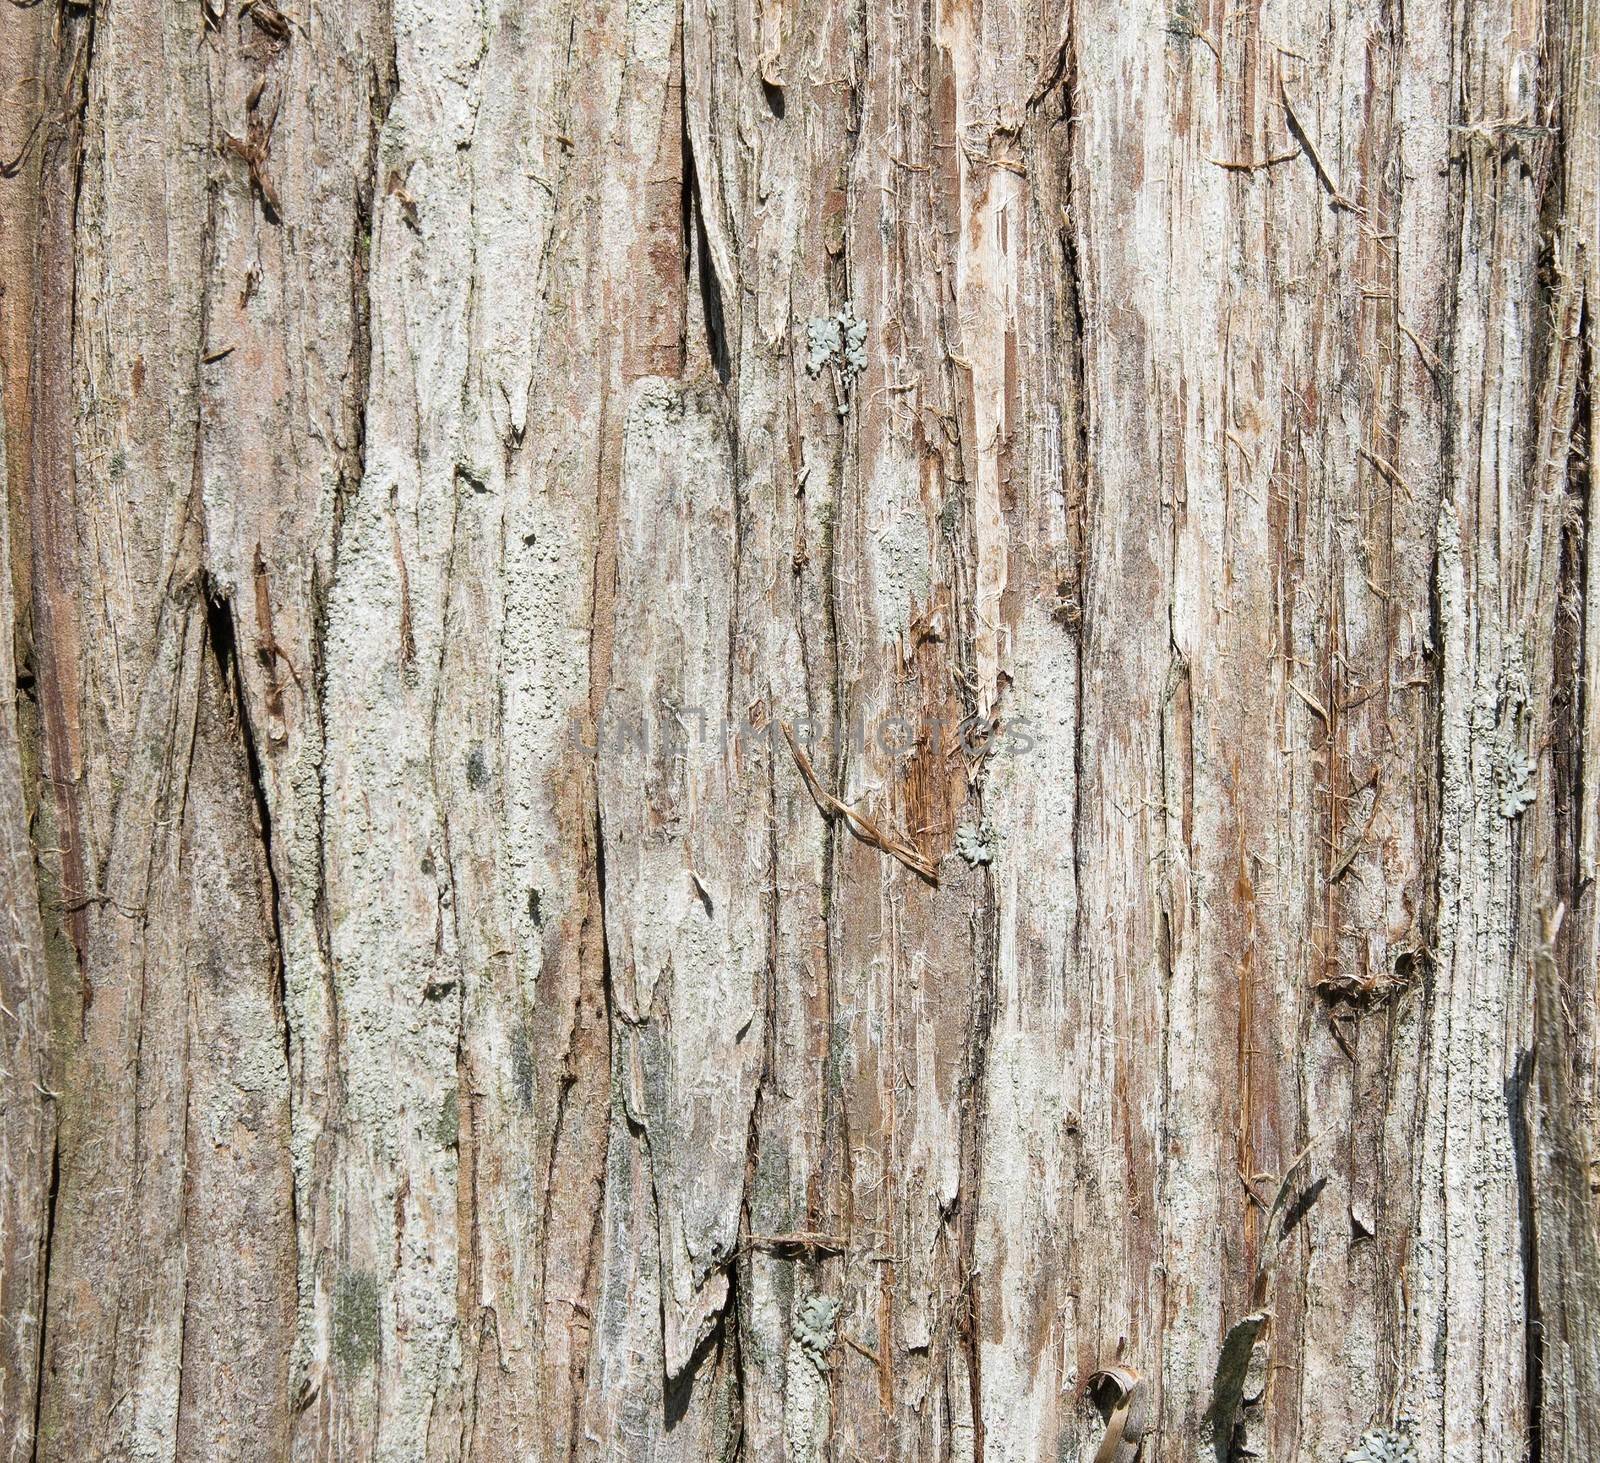 Wood tree texture background pattern by simpson33